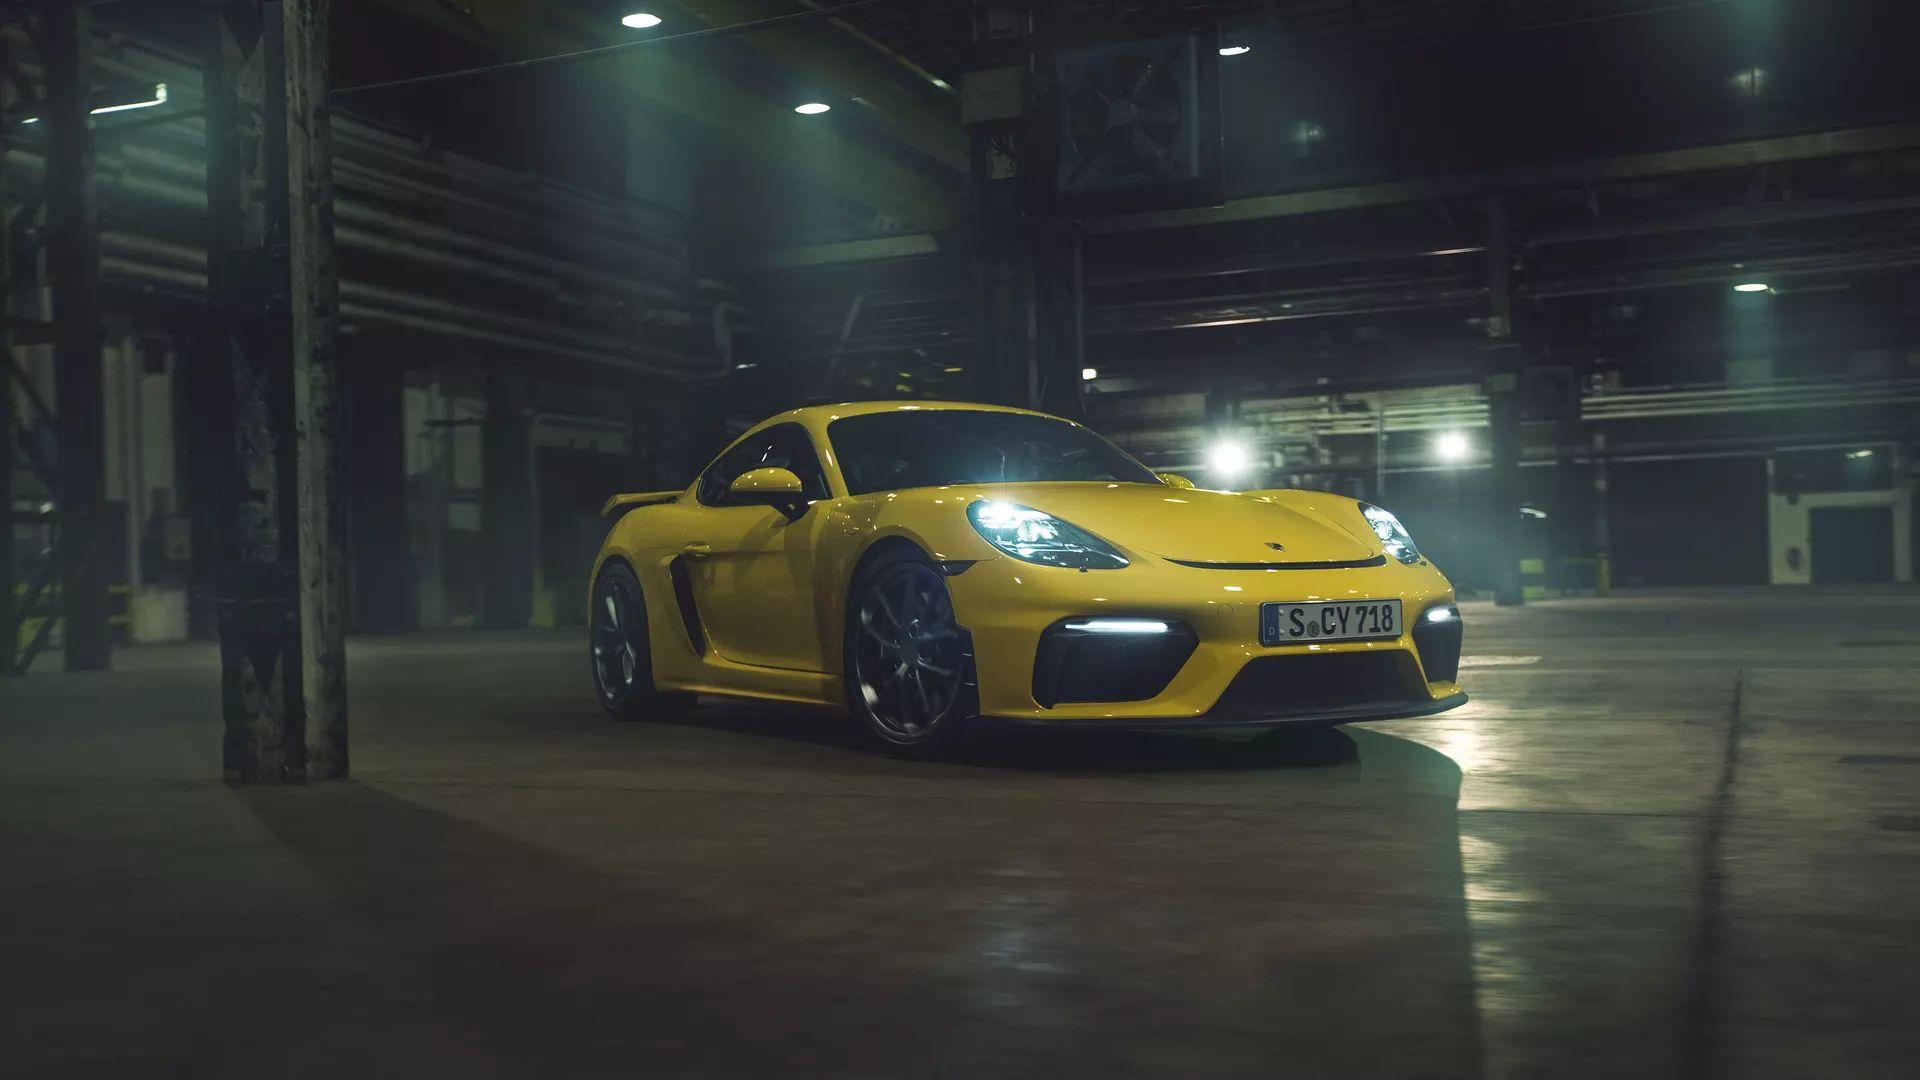 Porsche Cayman: Latest News, Reviews, Specifications, Prices